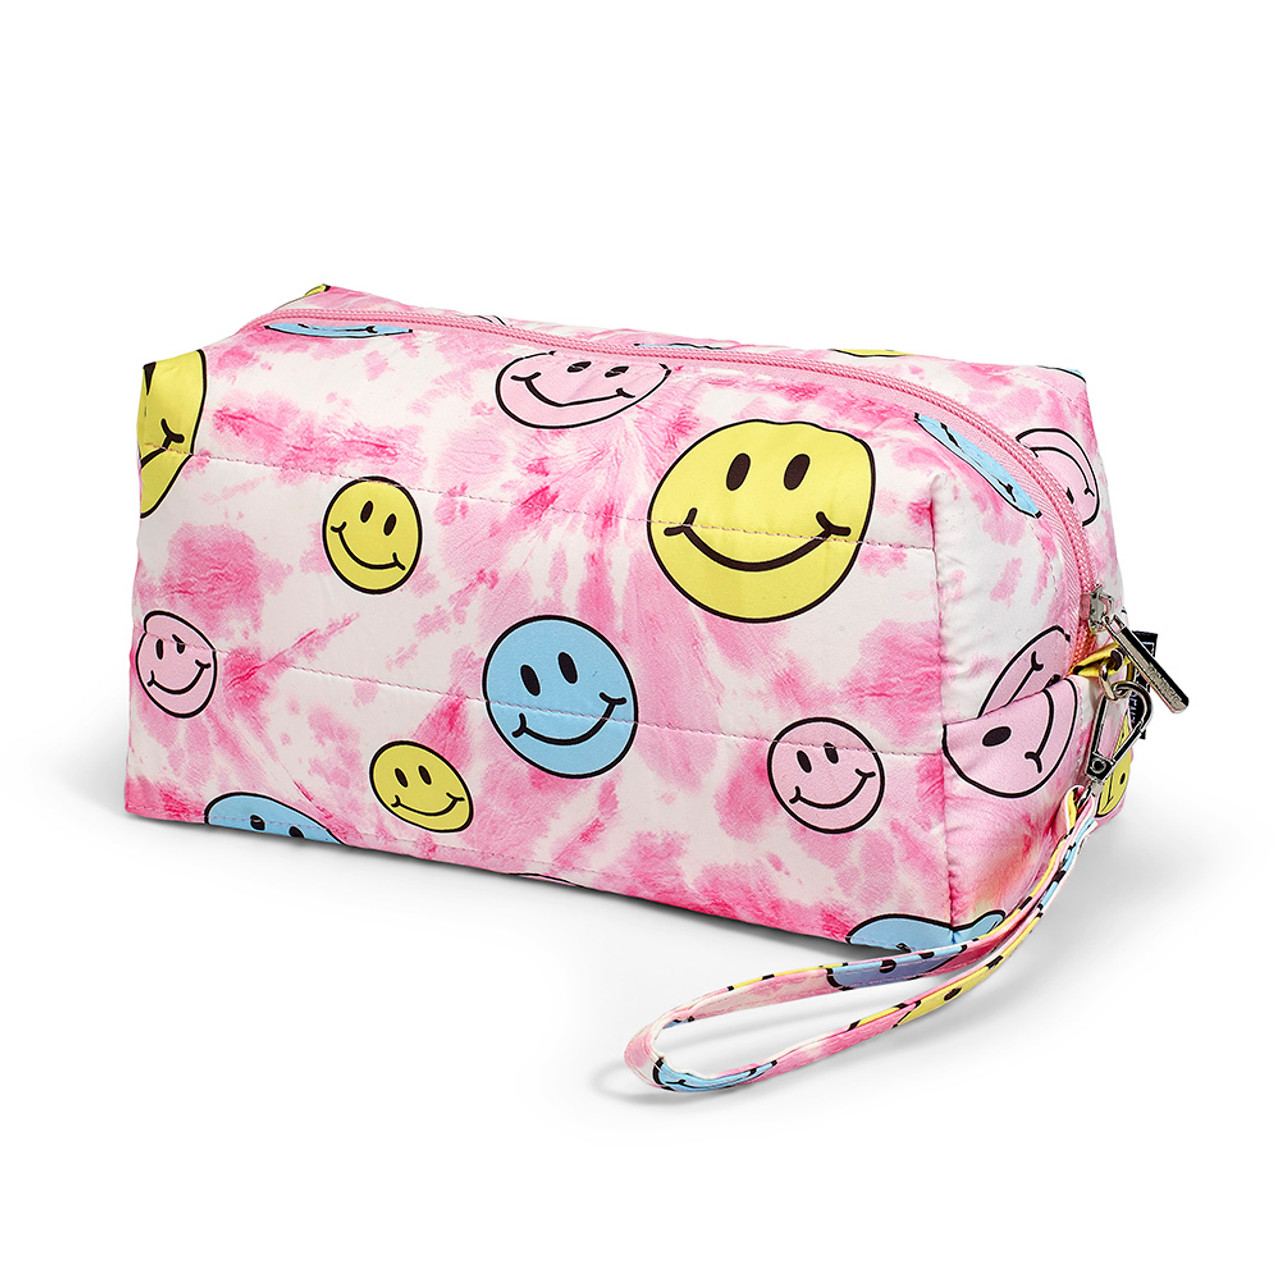 Smiley Tote Bags for Sale | Redbubble